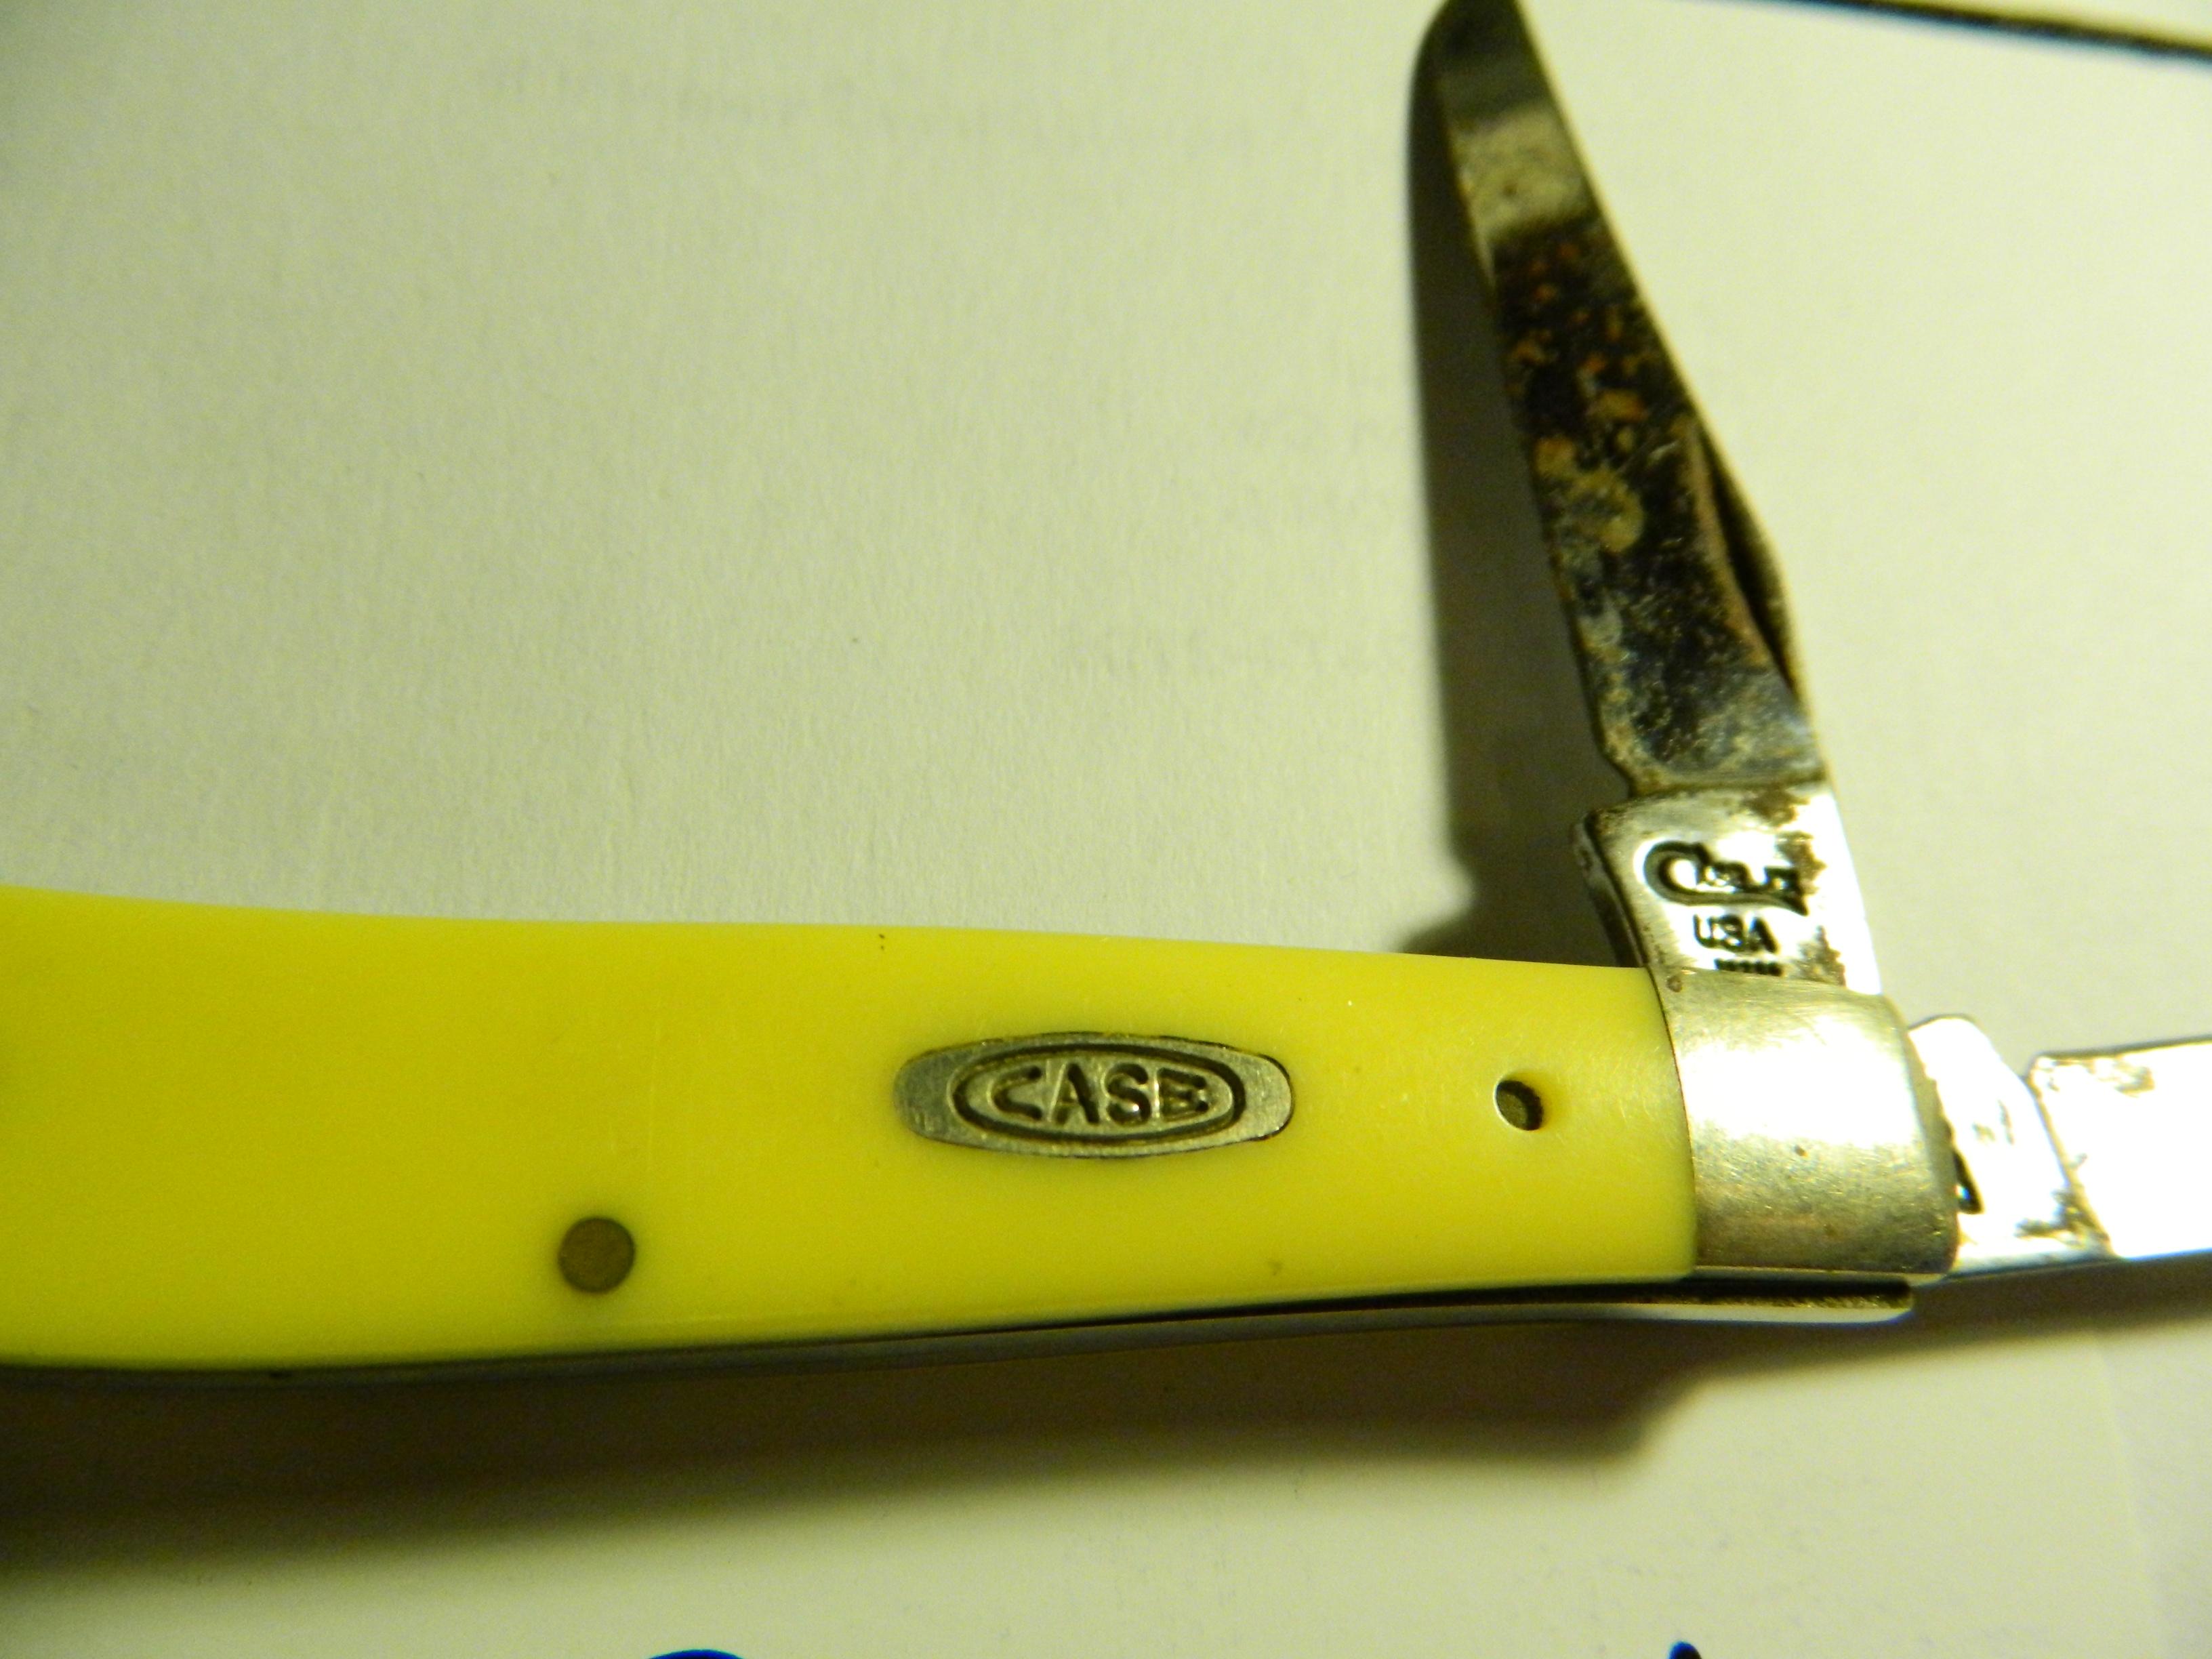 USED Case #3207, yellow composition, two blade trapper, from the year 1995, New Ulm Estate